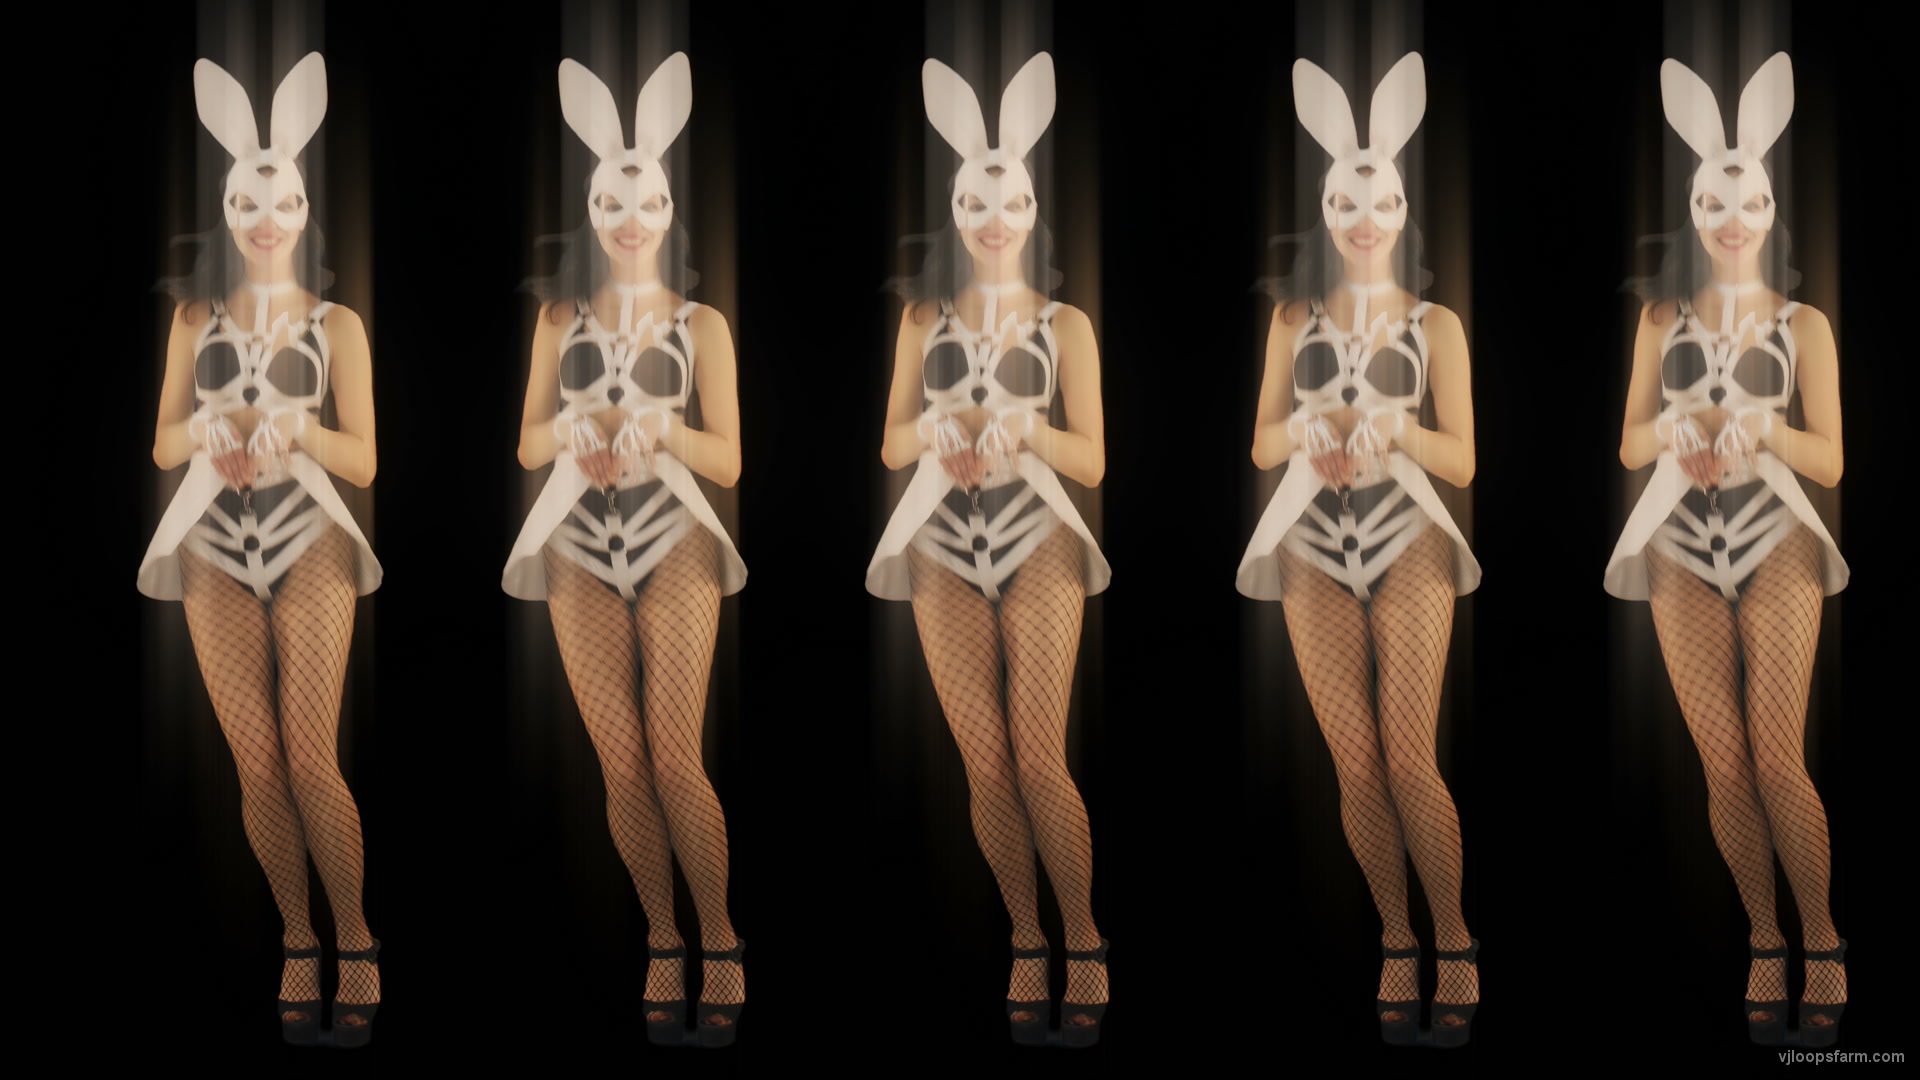 Five jumping Girls in Bunny Mask isolated on Black background 4K Video Art VJ Loop